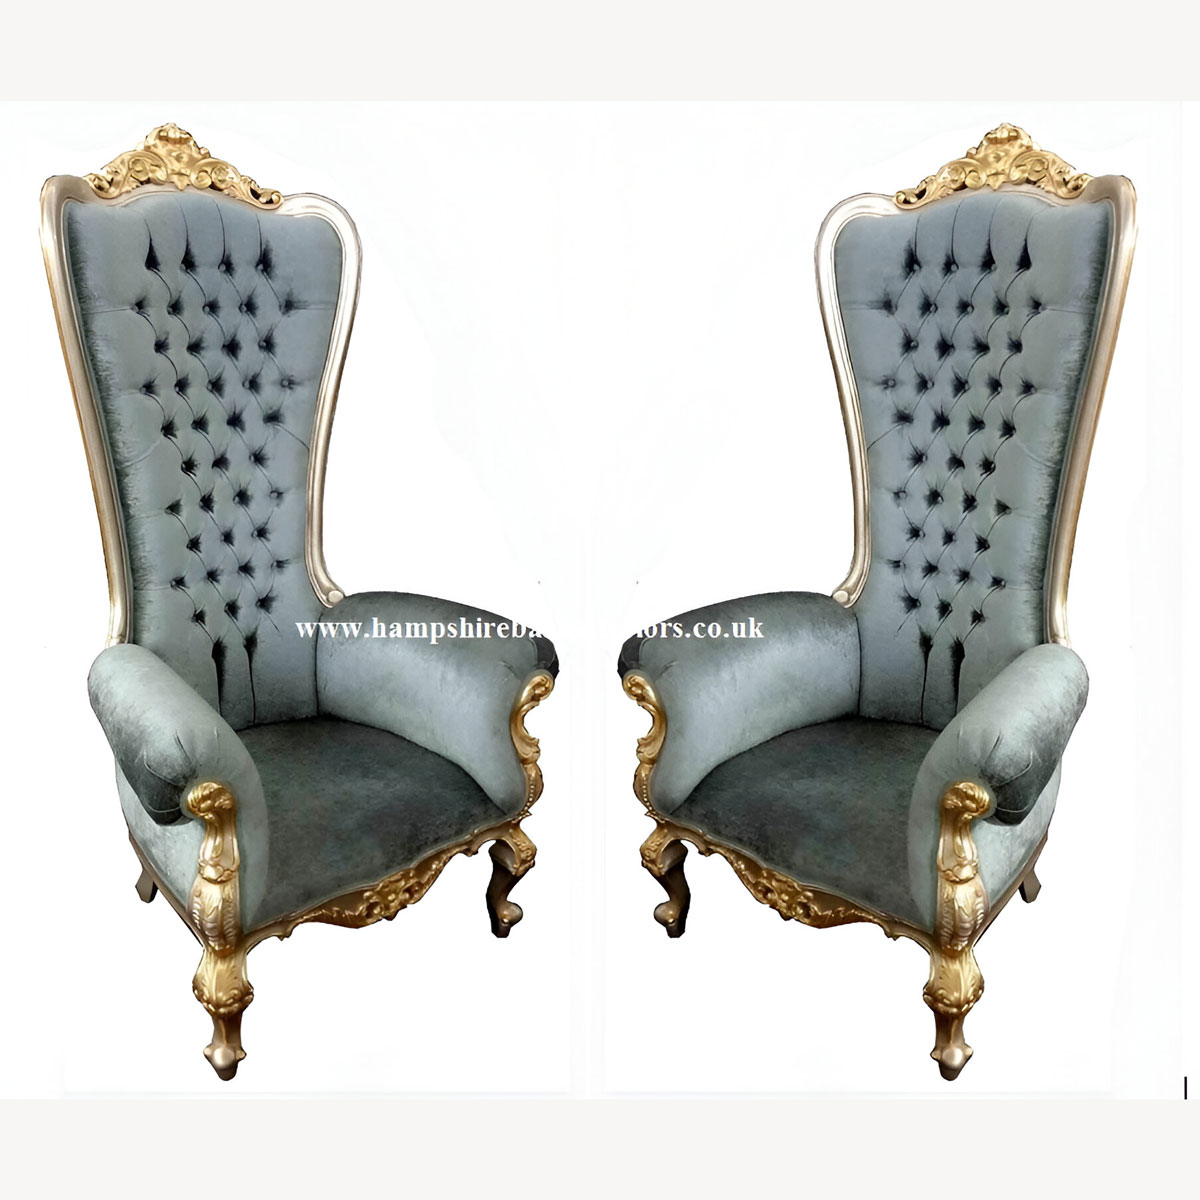 An Elegance Huge Throne Chair In Your Choice Frame Colour And Fabric Colour 1 - Hampshire Barn Interiors - An Elegance Huge Throne Chair In Your Choice Frame Colour And Fabric Colour -